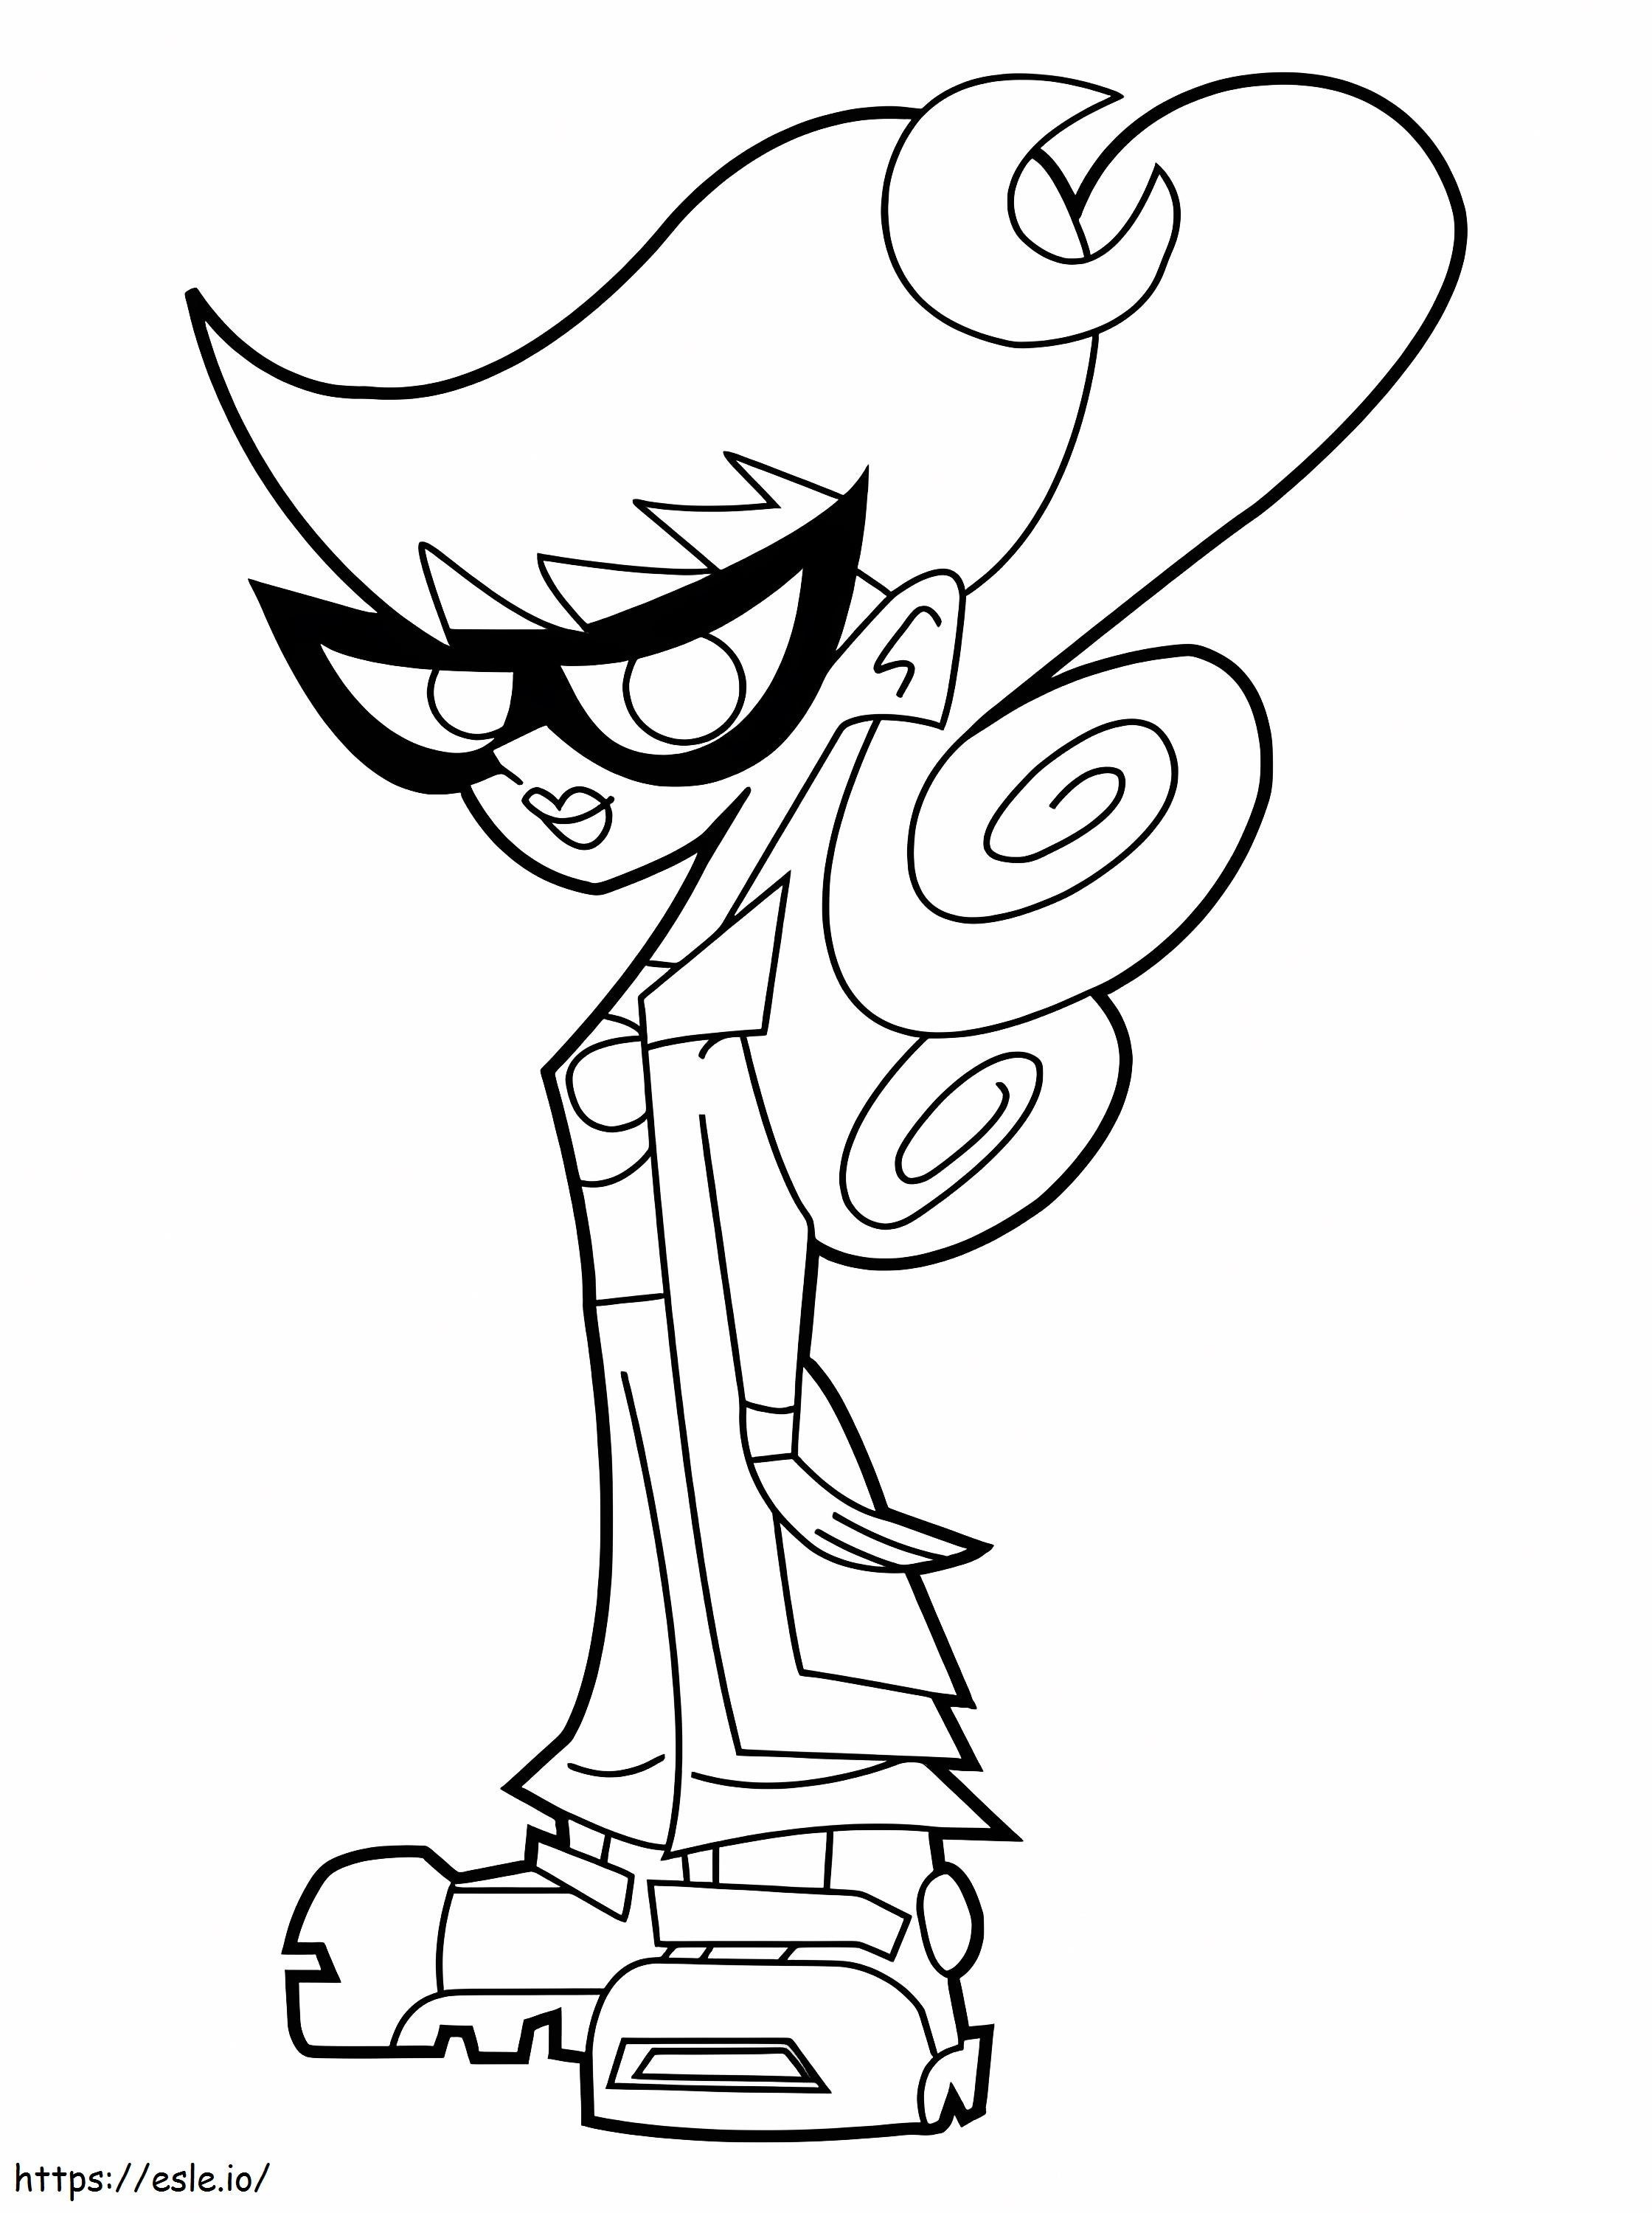 Mary Test From Johnny Test coloring page